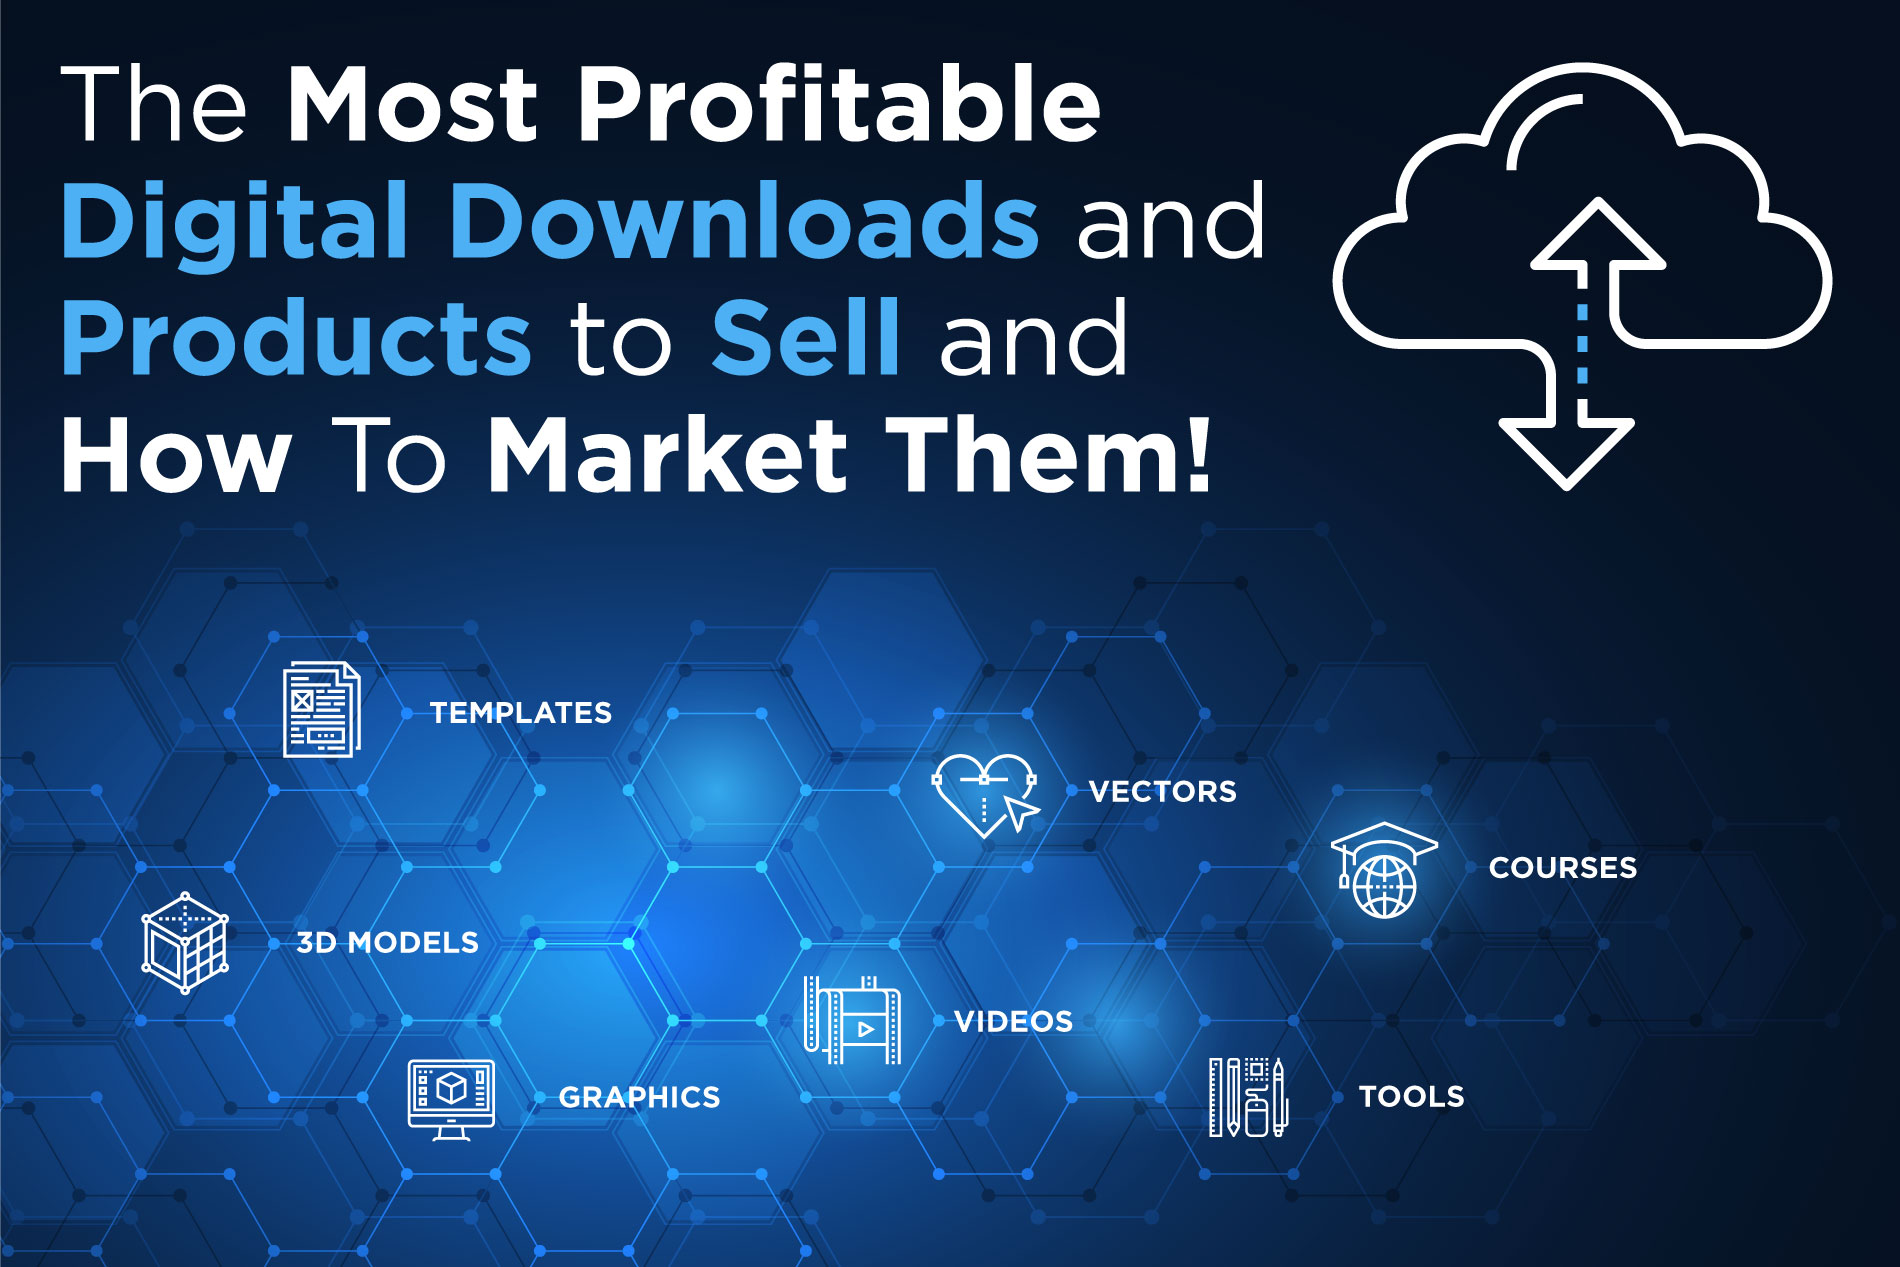 The Most Profitable Digital Downloads and Products to Sell and How To Create/Market Them